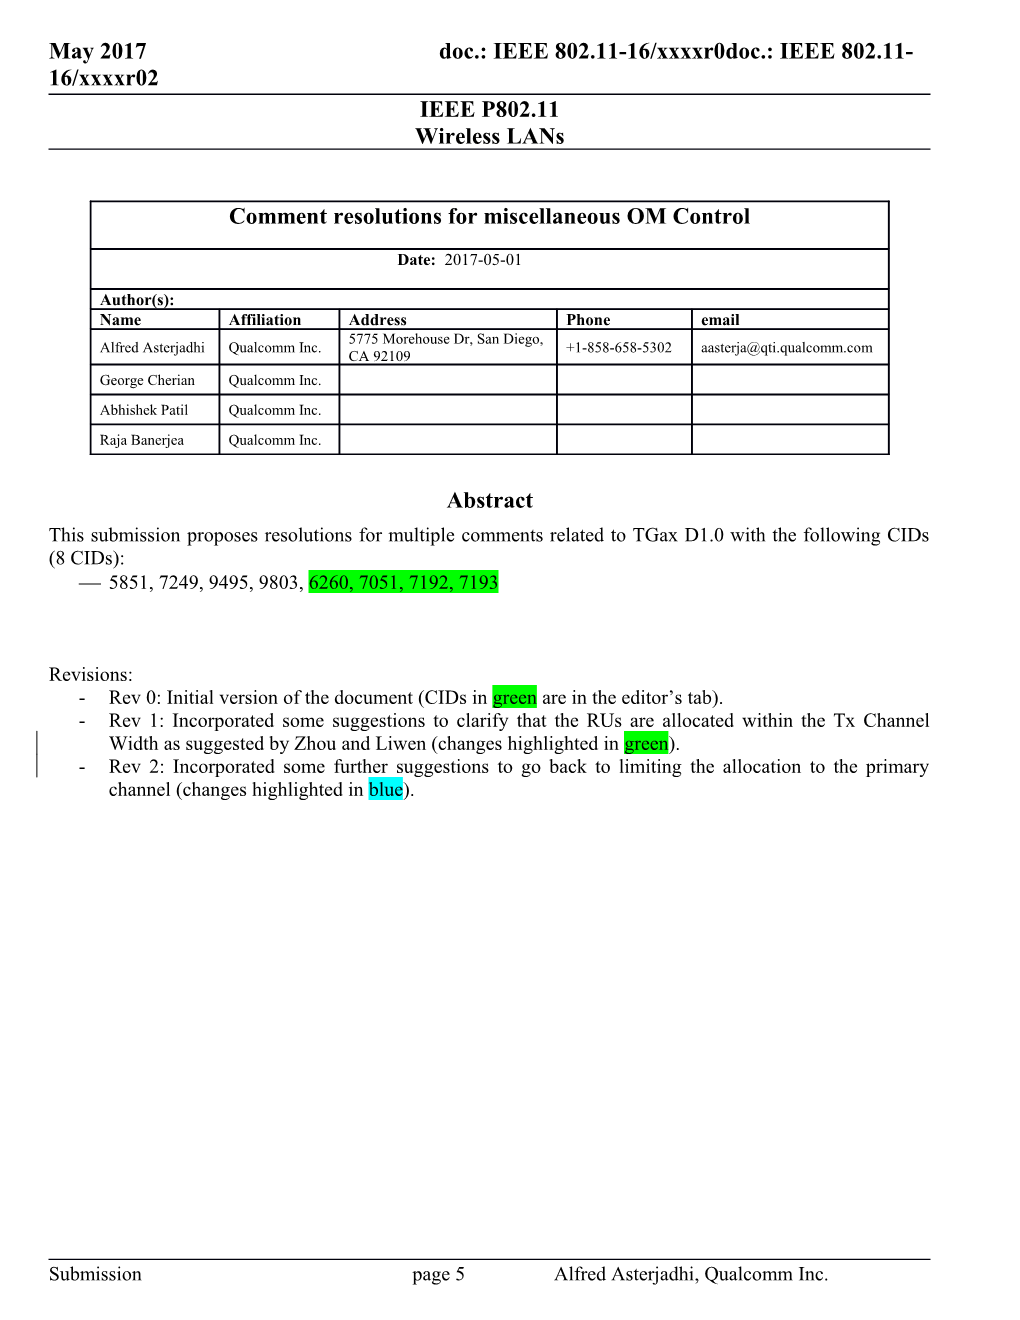 Rev 0: Initial Version of the Document (Cids in Green Are in the Editor S Tab)